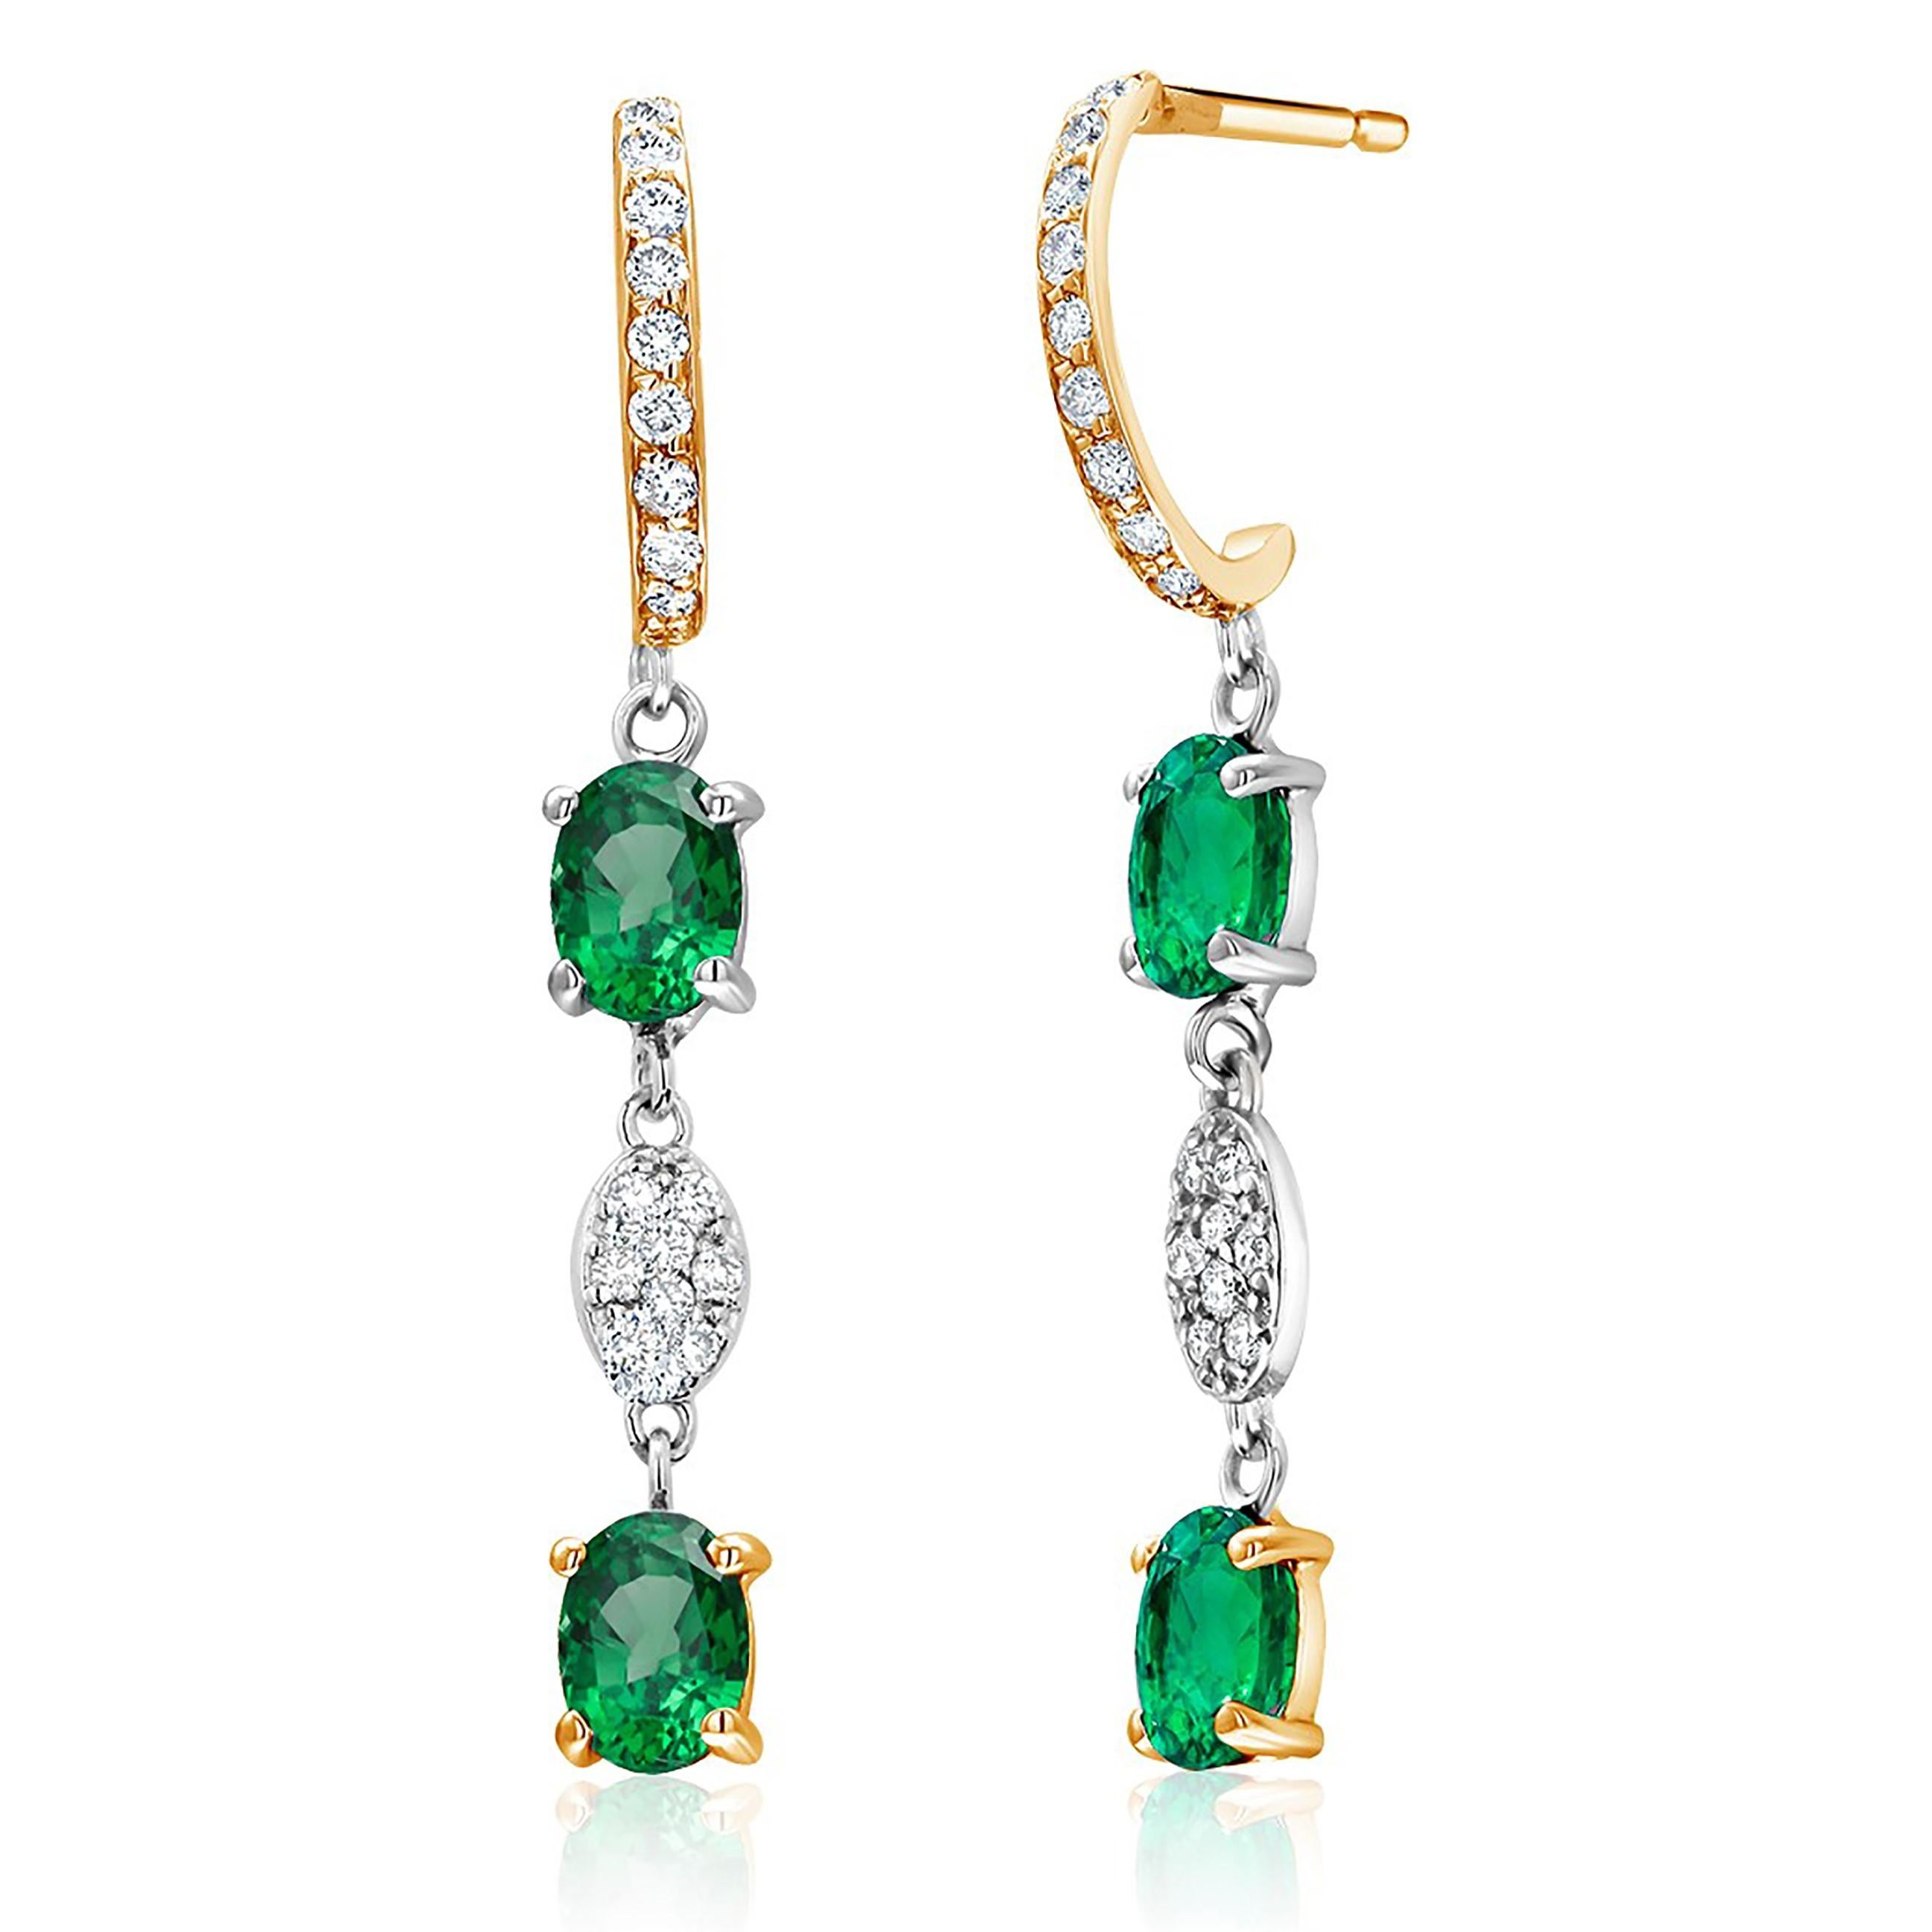 Fourteen karats yellow and white gold hoop drop earrings 
Diamond weighing 0.45 carat
Four Colombian emeralds weighing 2.12 carats
Four oval-shaped emeralds tone color is of Parakeet green 
One of a kind earrings
Four bright and vivid green matched